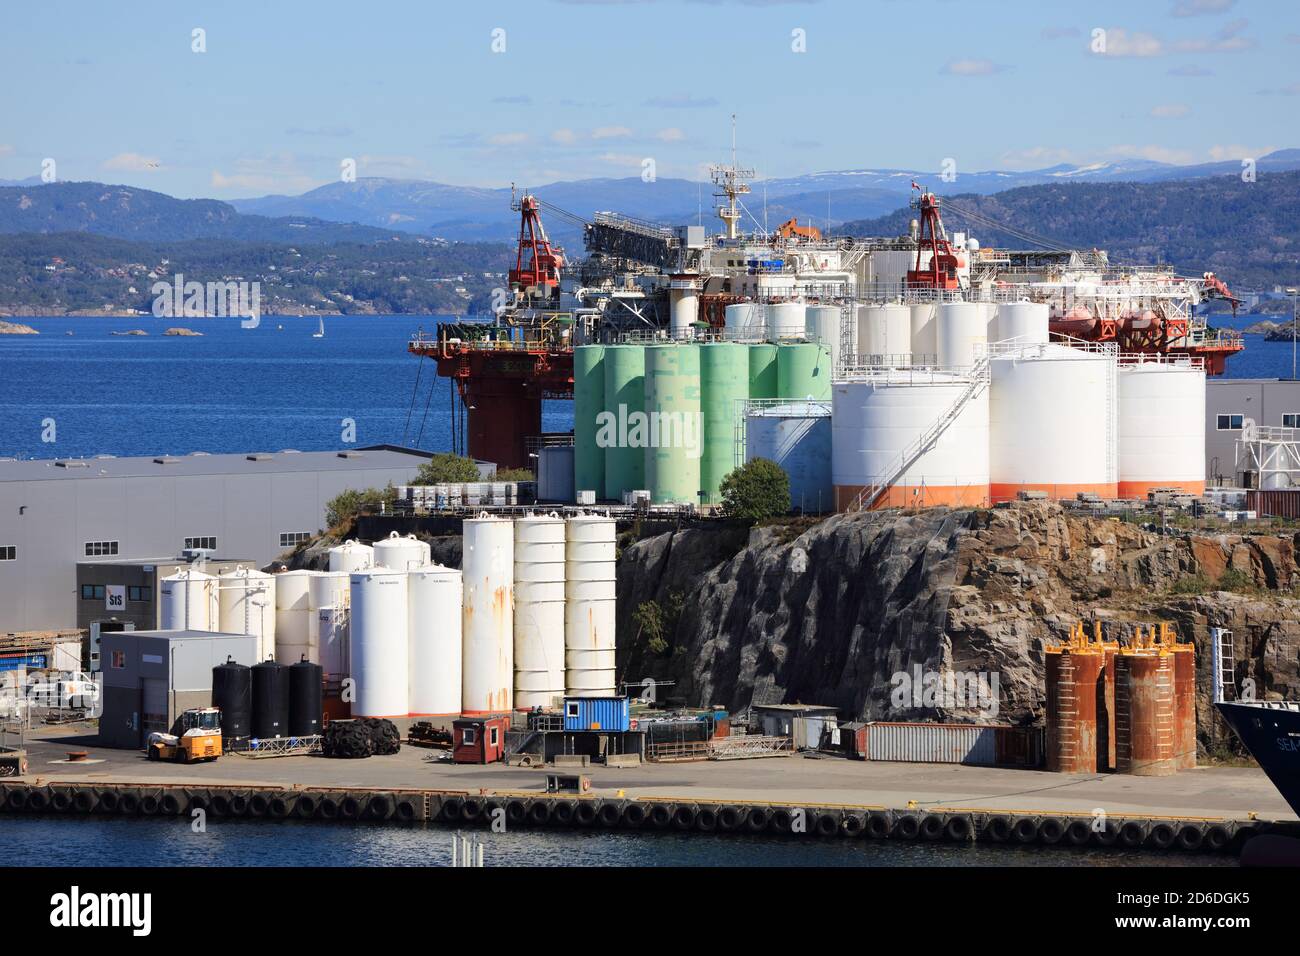 AGOTNES, NORWAY - JULY 24, 2020: Coast Center Base facility in Norway. CCB is one of most important North Sea oil industry service, maintenance and pr Stock Photo